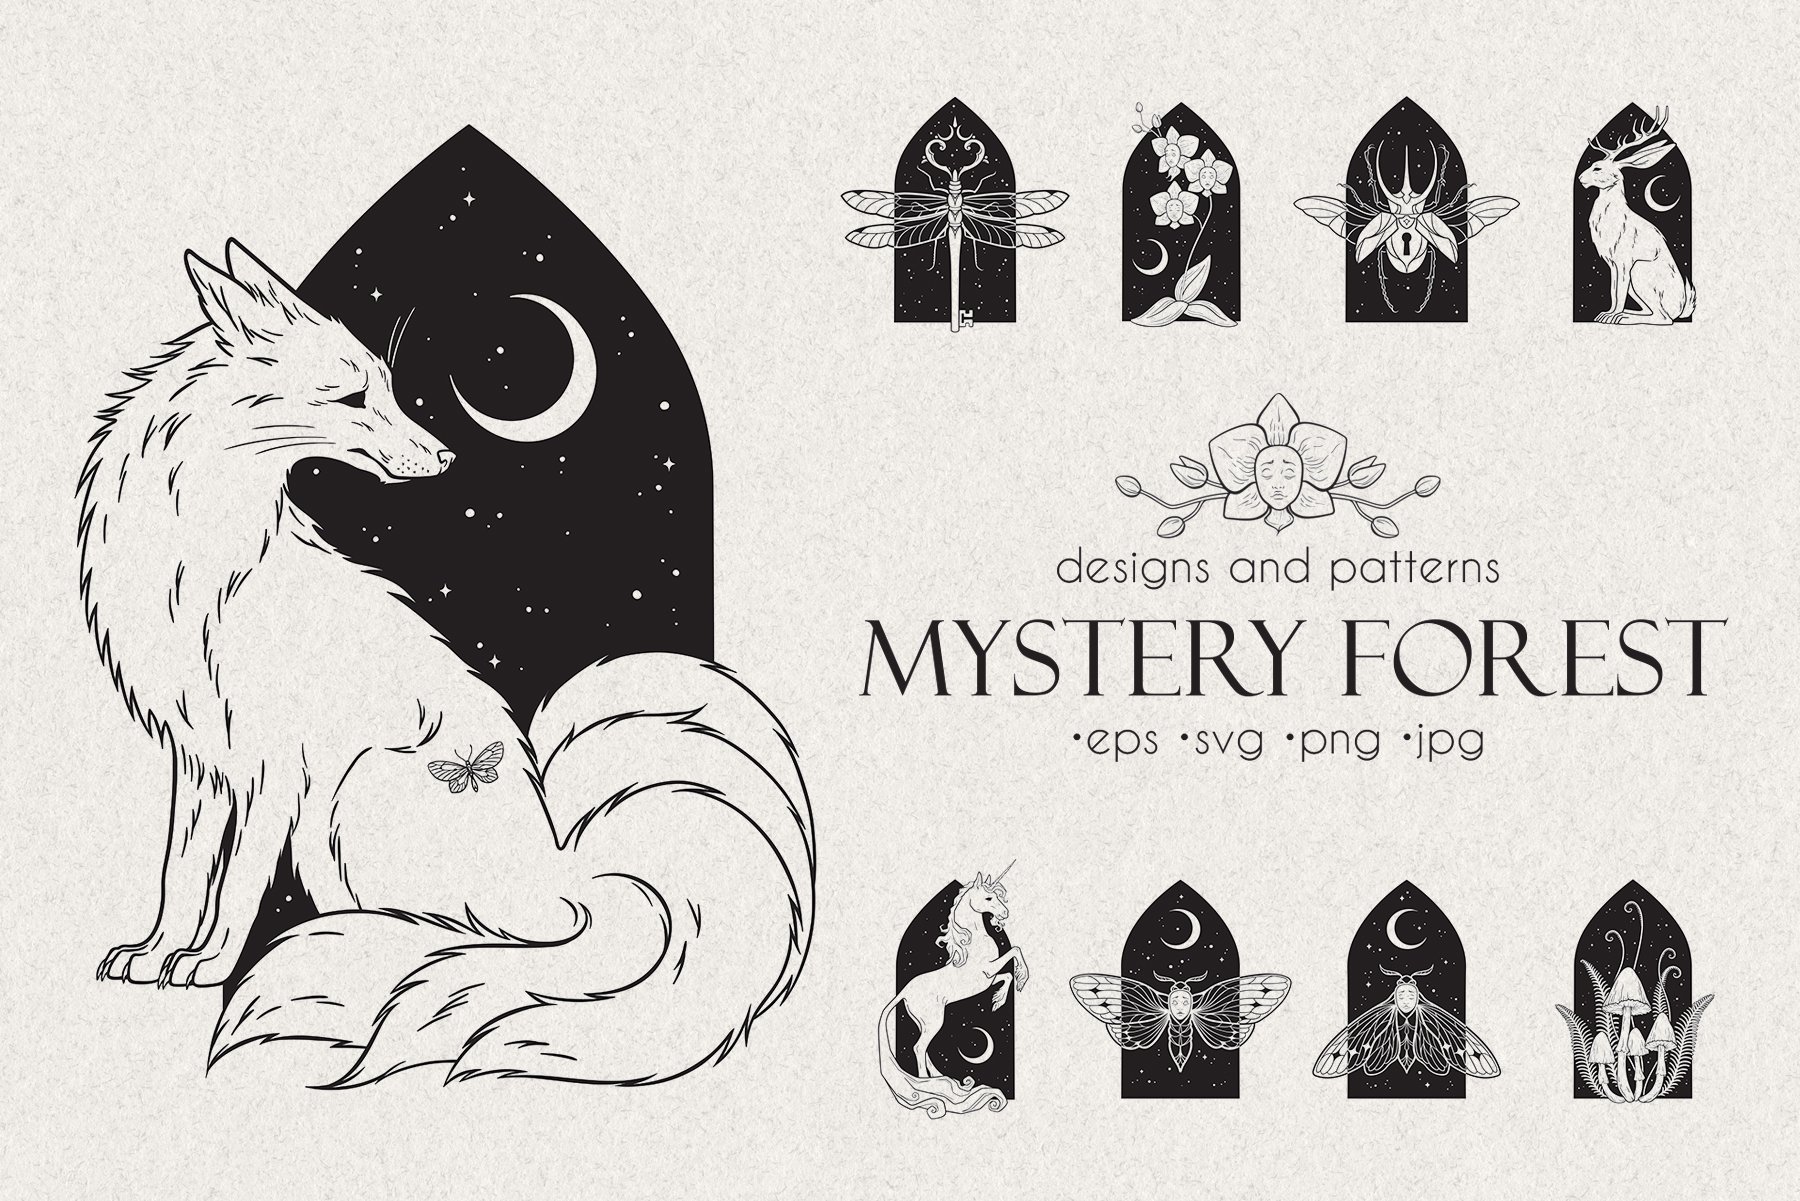 Mystery Forest Arts and Patterns cover image.